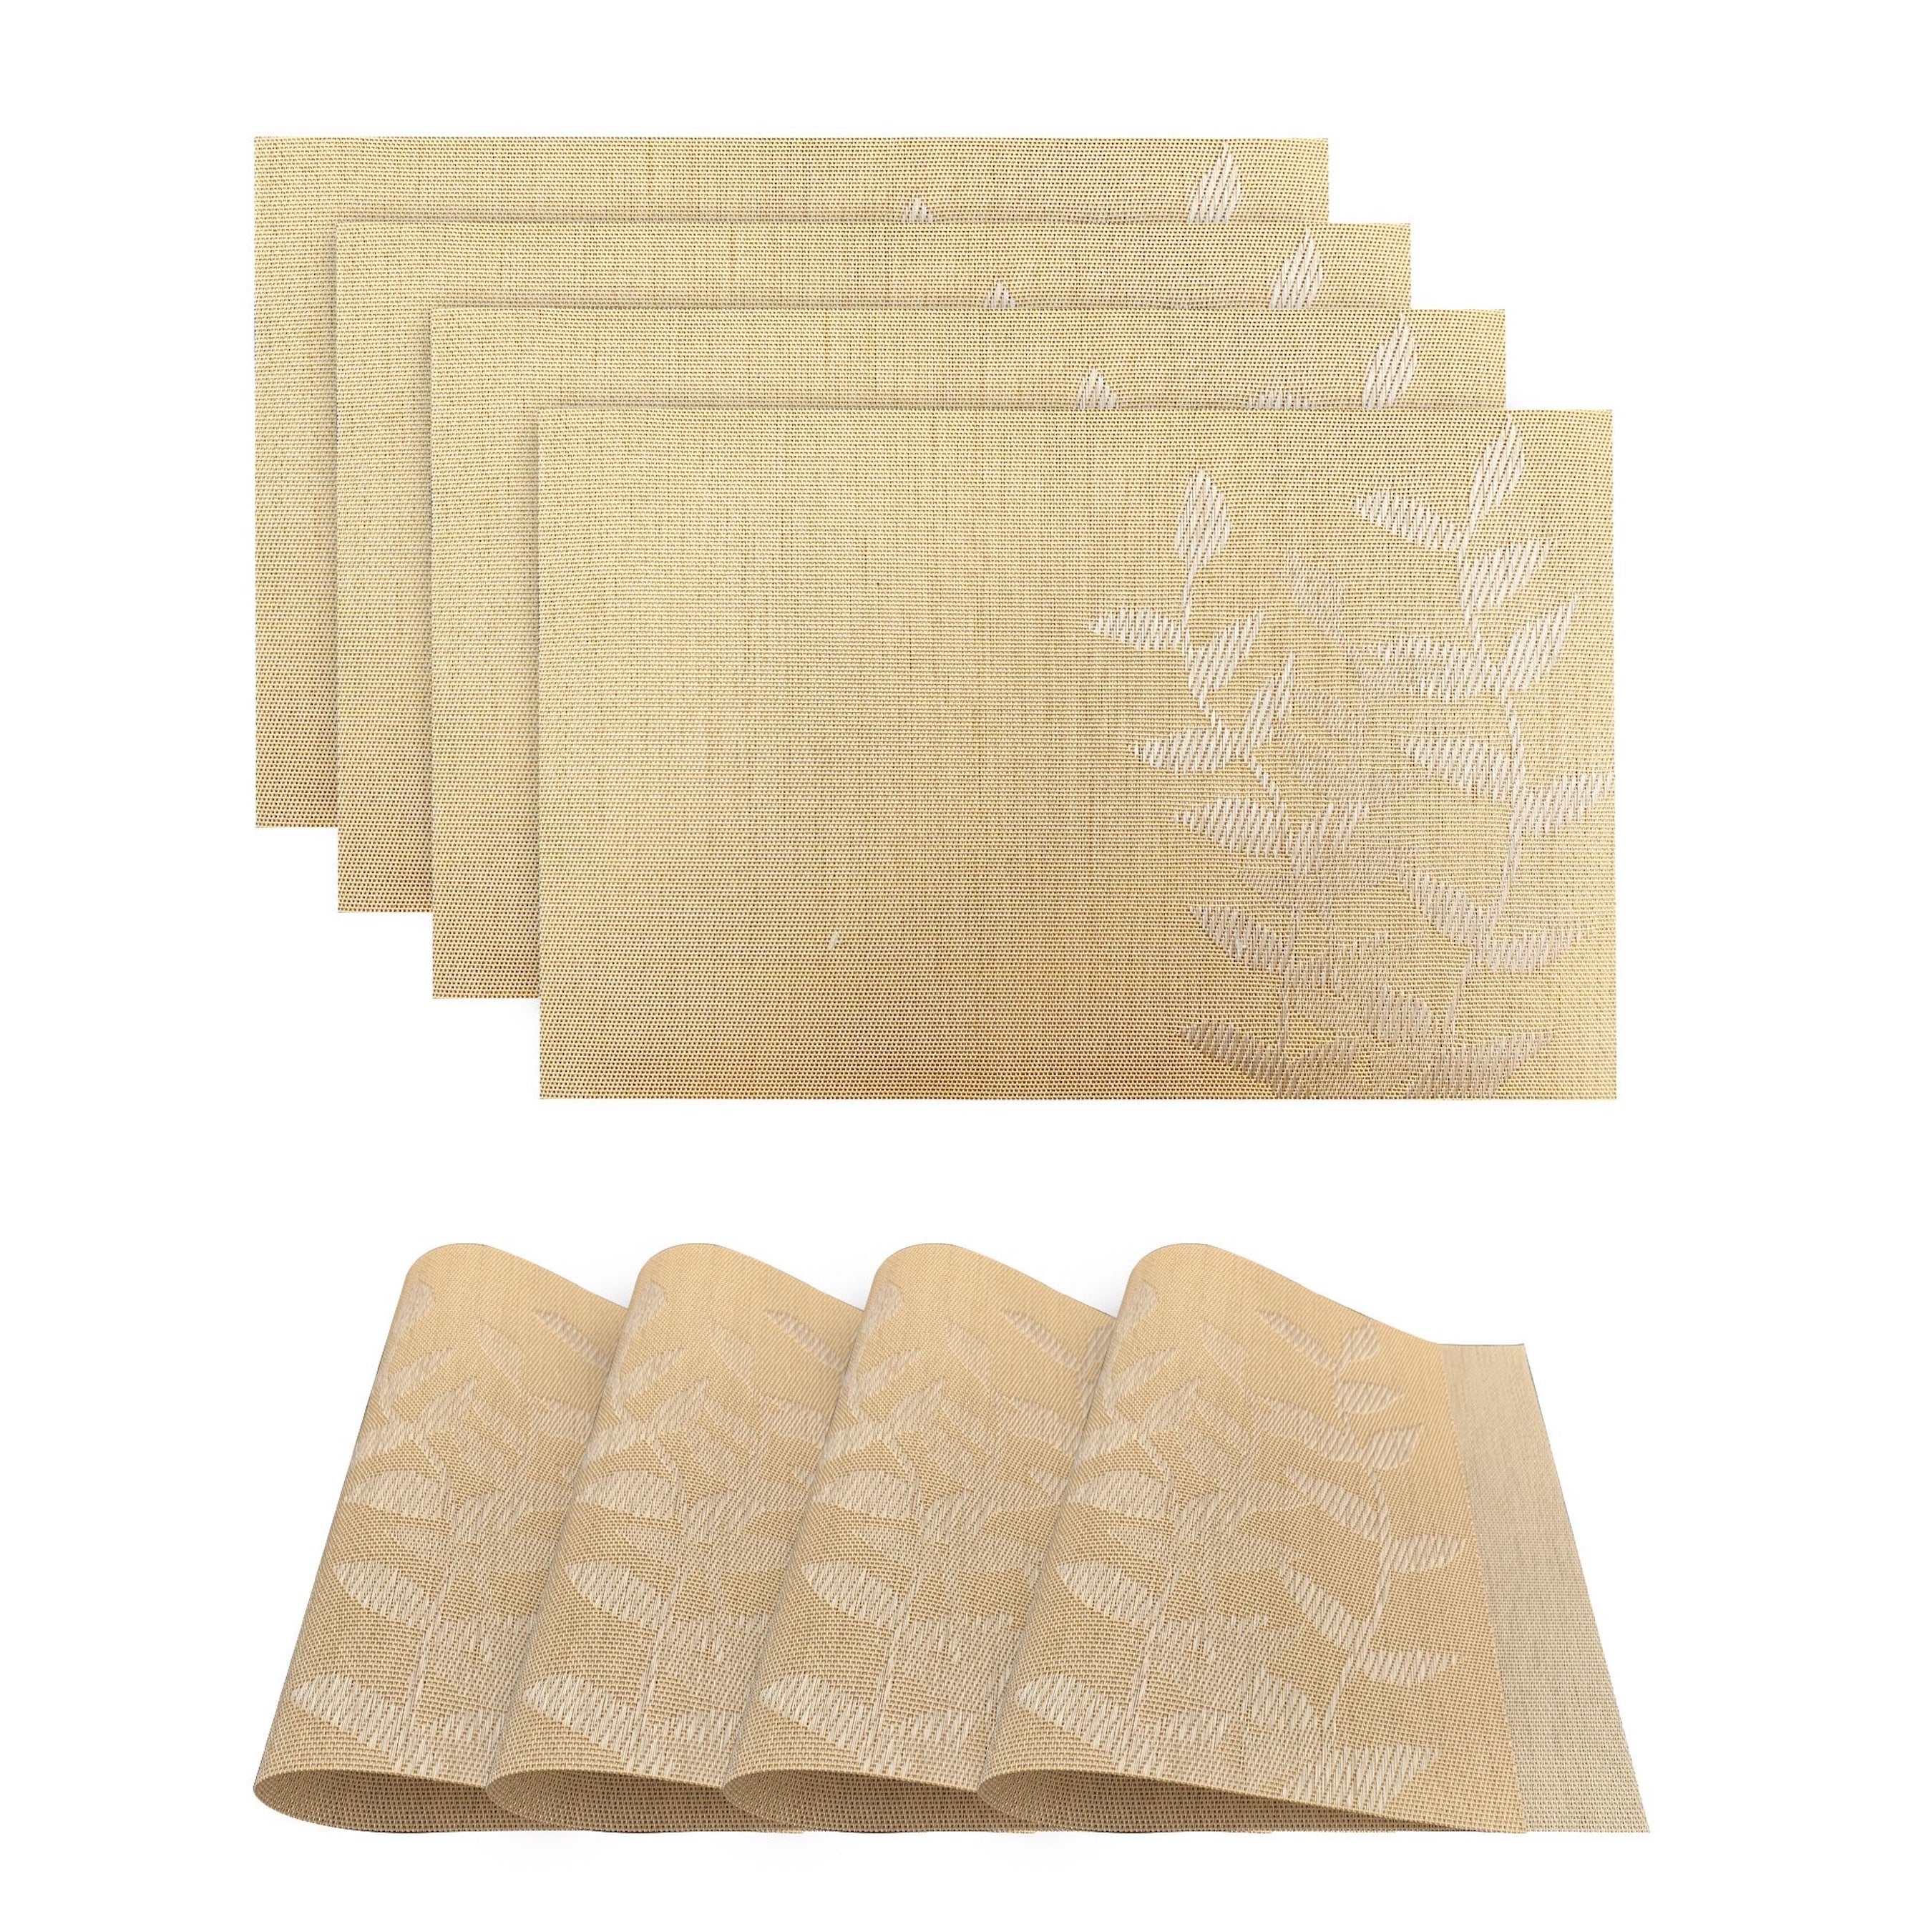 Dainty Home Leaf Woven Textilene Crossweave With Textured Floral Leaves Pattern Reversible 12" x 18" Rectangular Placemats